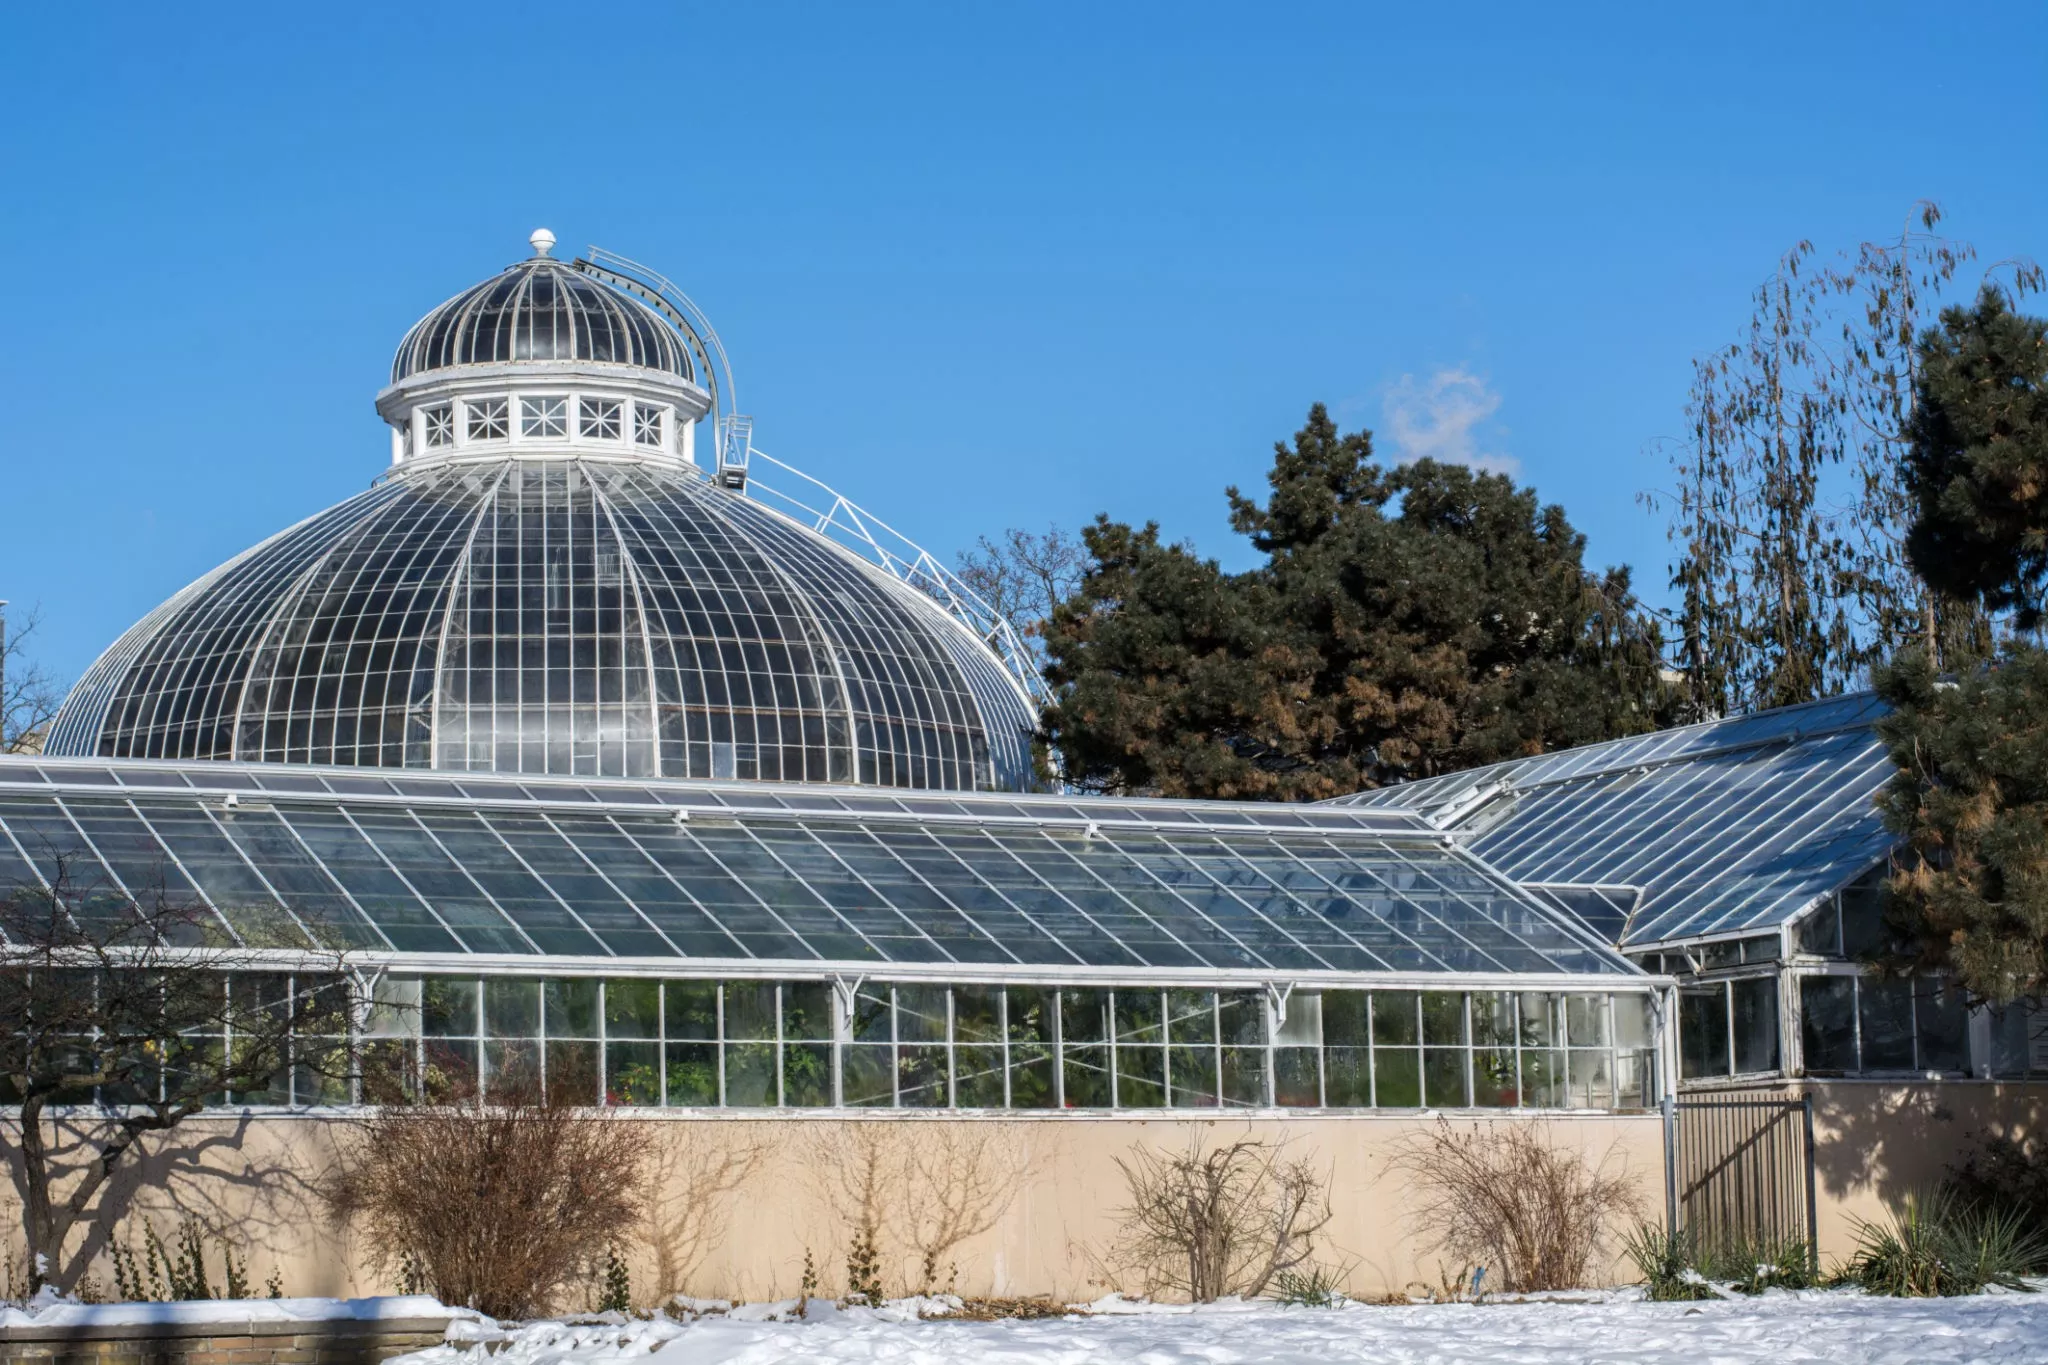 Allan's Gardens in Canada, North America | Botanical Gardens - Rated 4.1